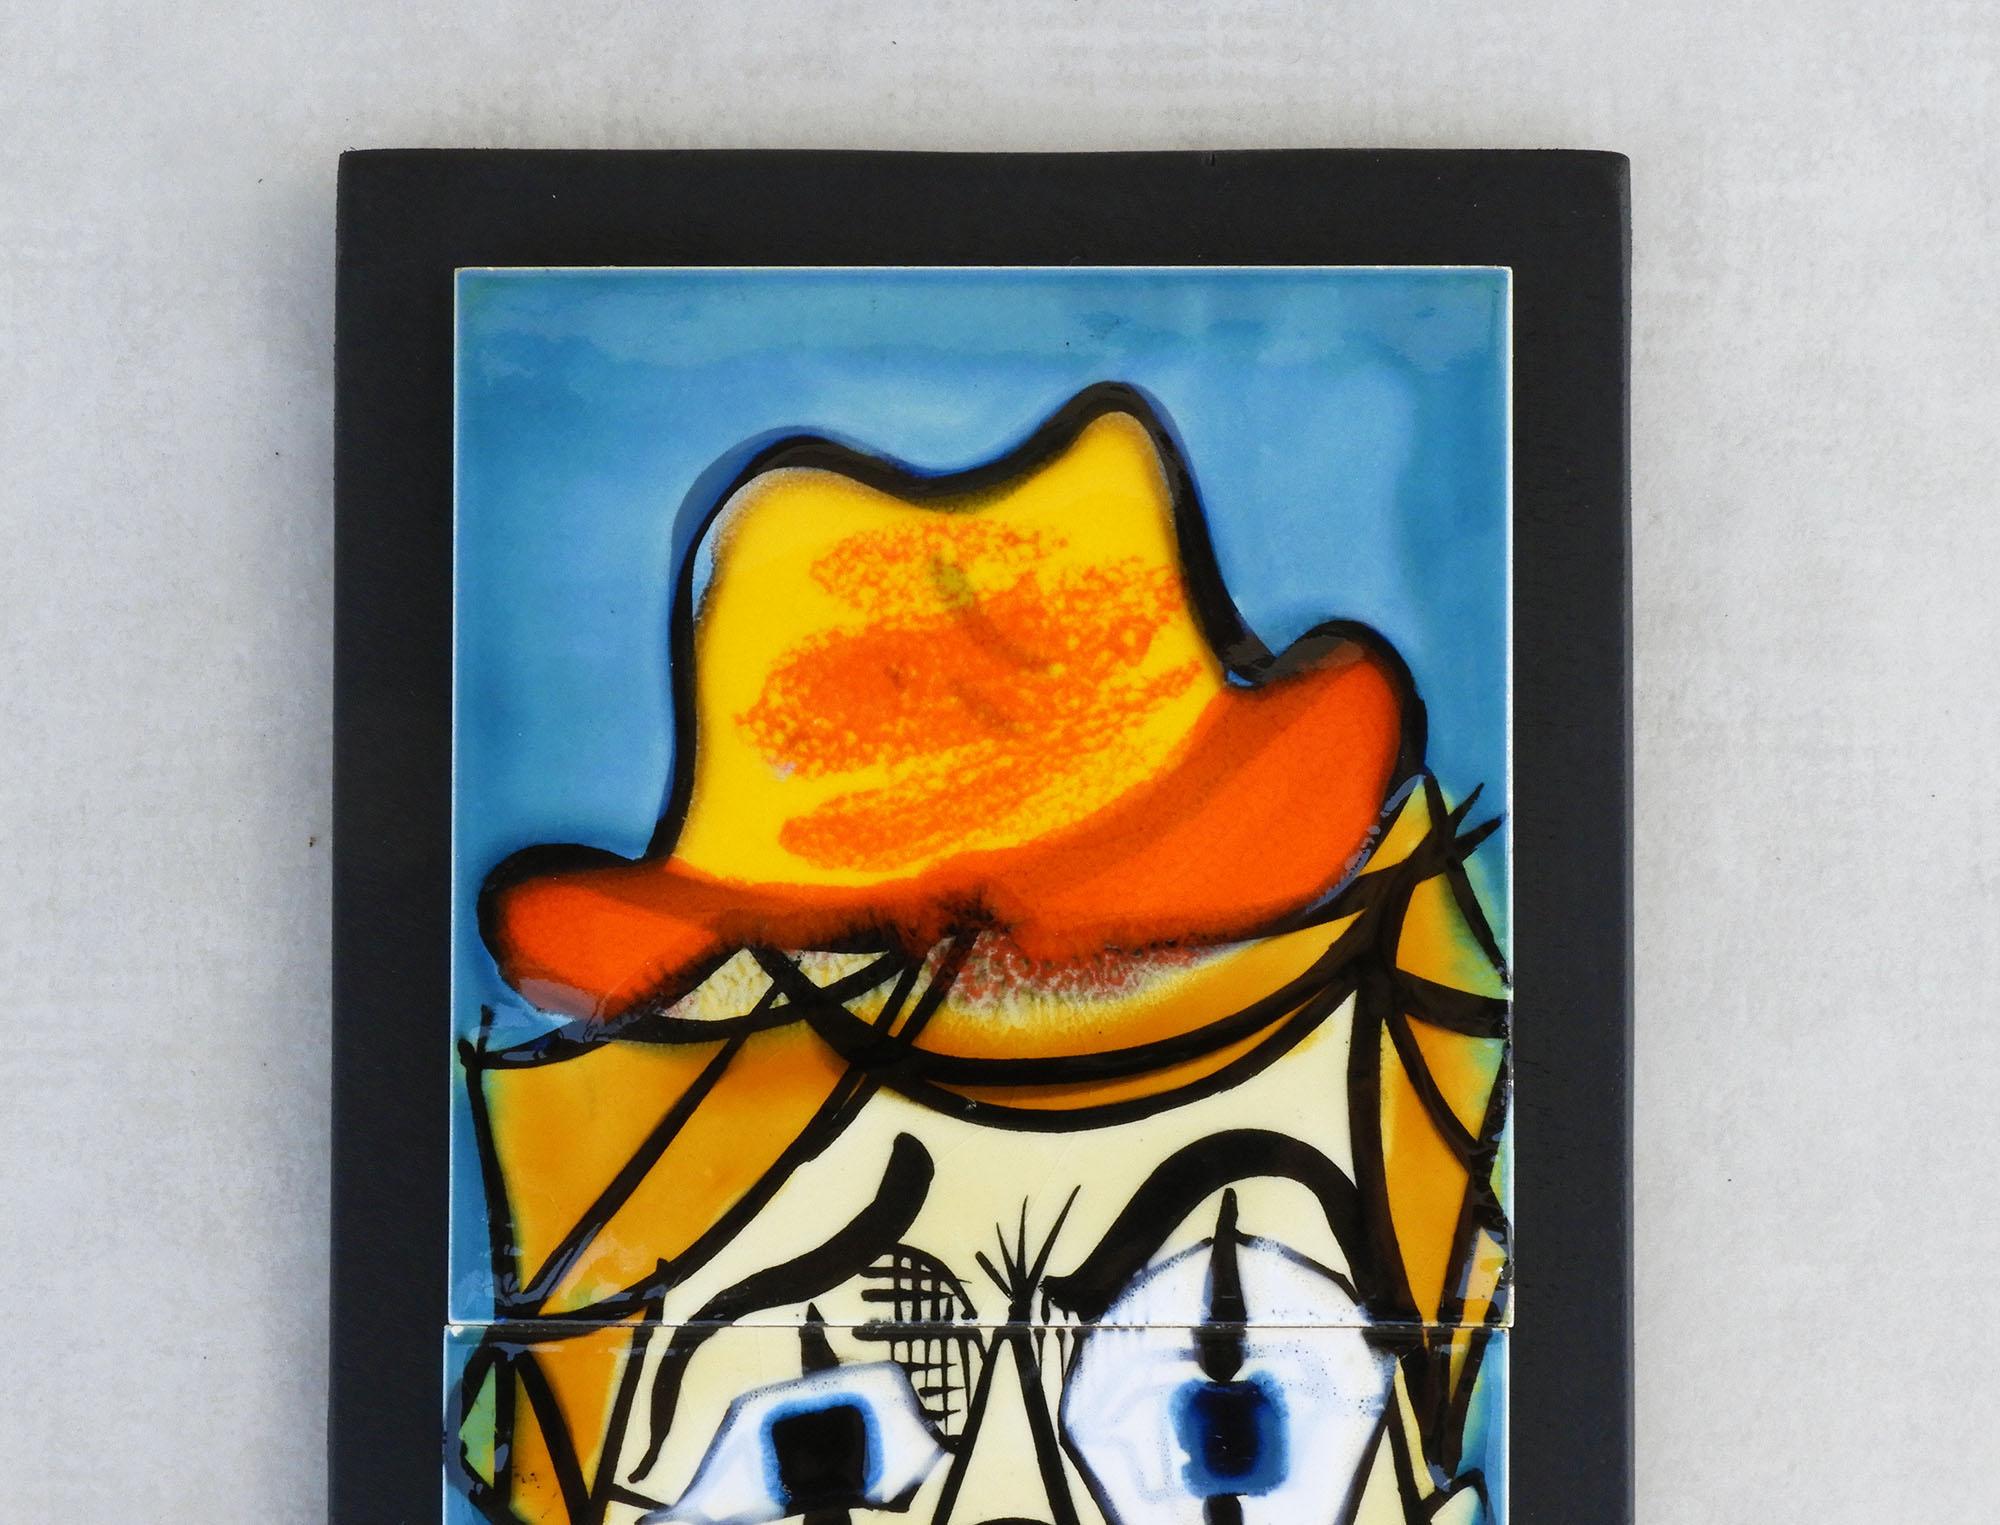 20th Century Wall Art Panel ‘LE CLOWN’ by Artist La Grange for Vallauris C1960 FREE SHIPPING